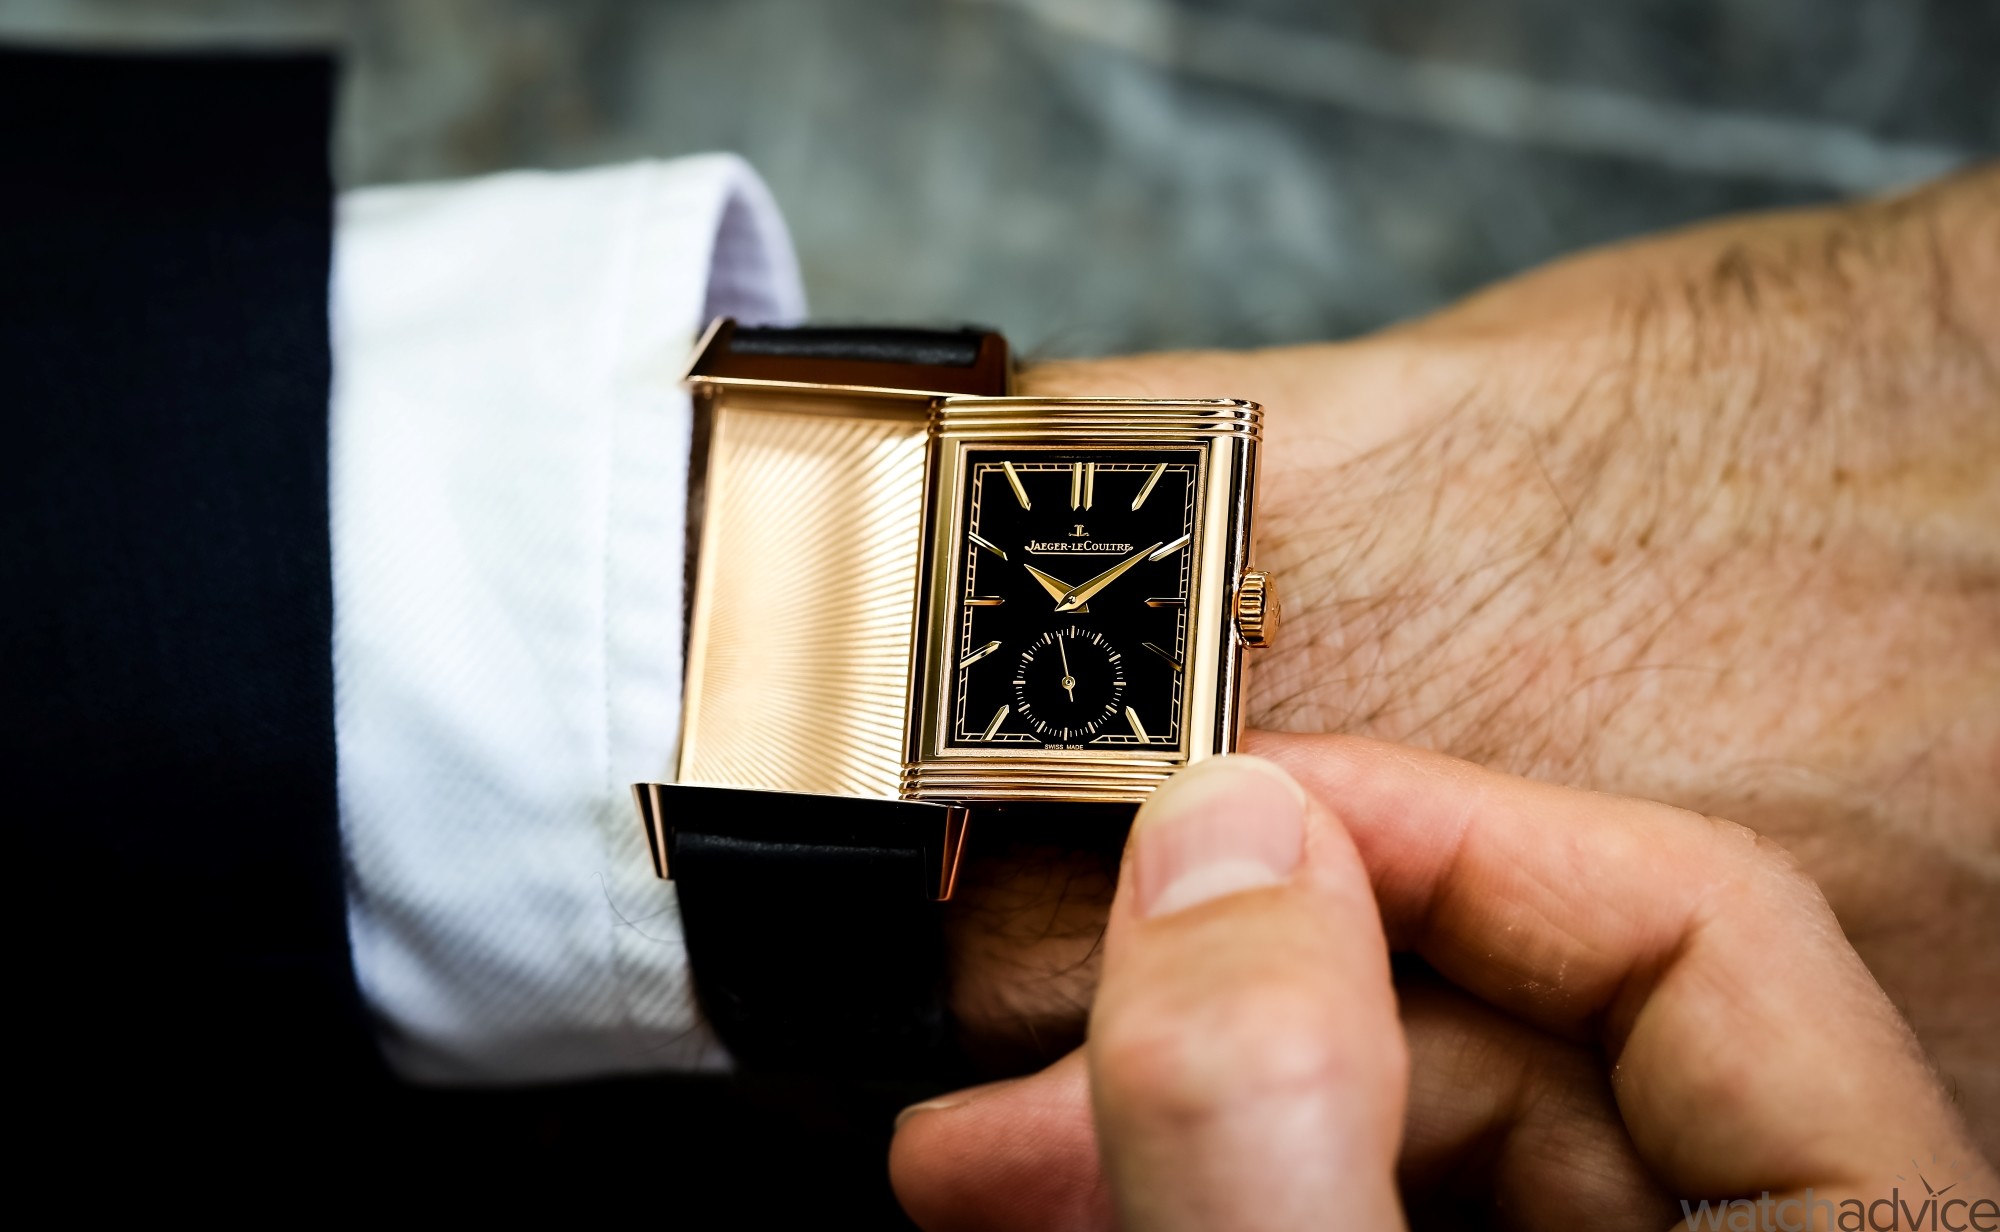 The iconic journey of the Jaeger-LeCoultre Reverso watch